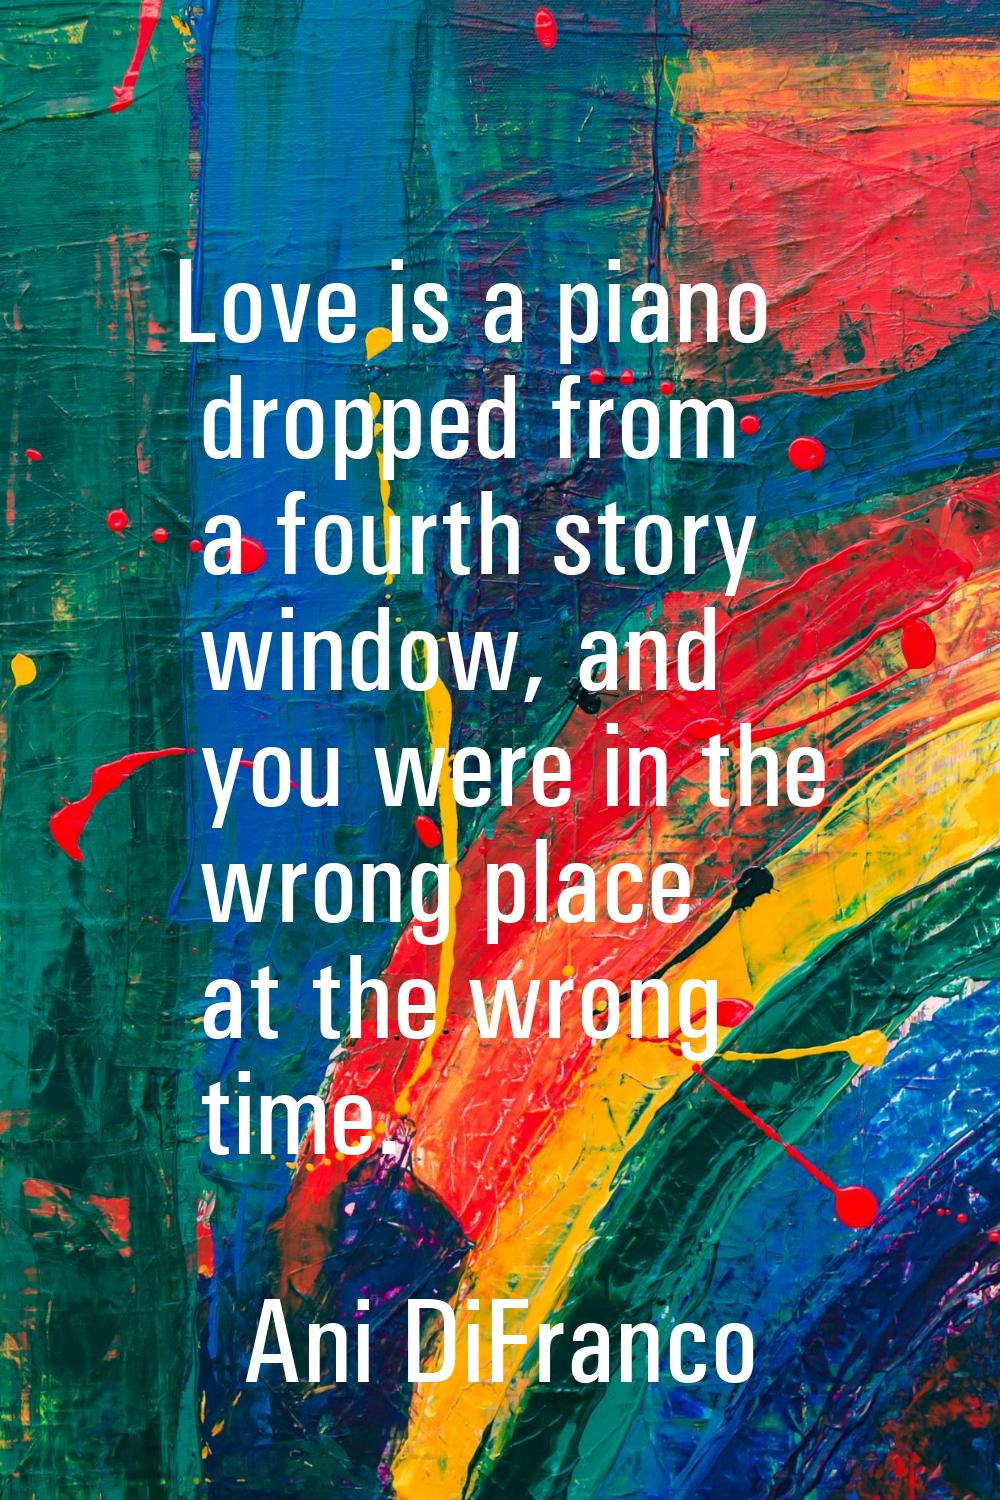 Love is a piano dropped from a fourth story window, and you were in the wrong place at the wrong ti